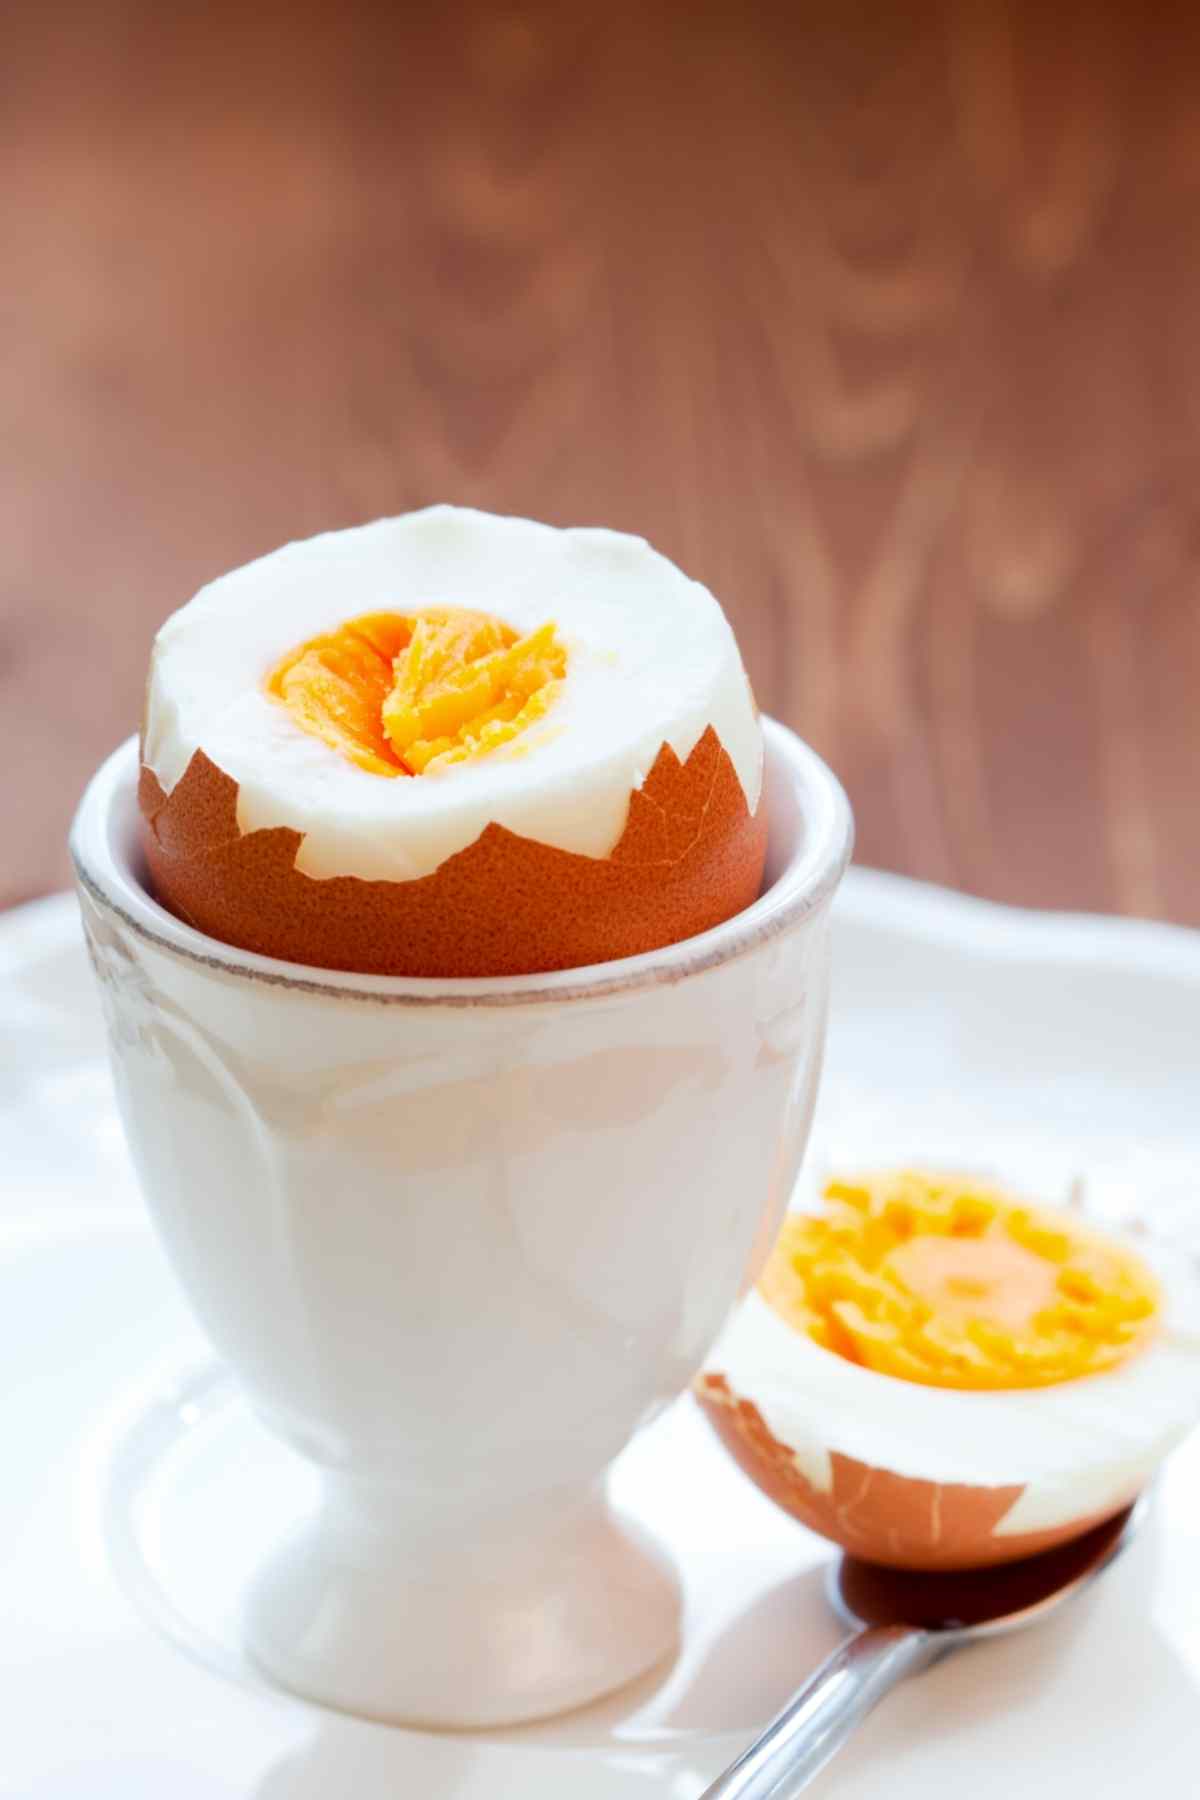 Perfect hard boiled egg in an egg cup